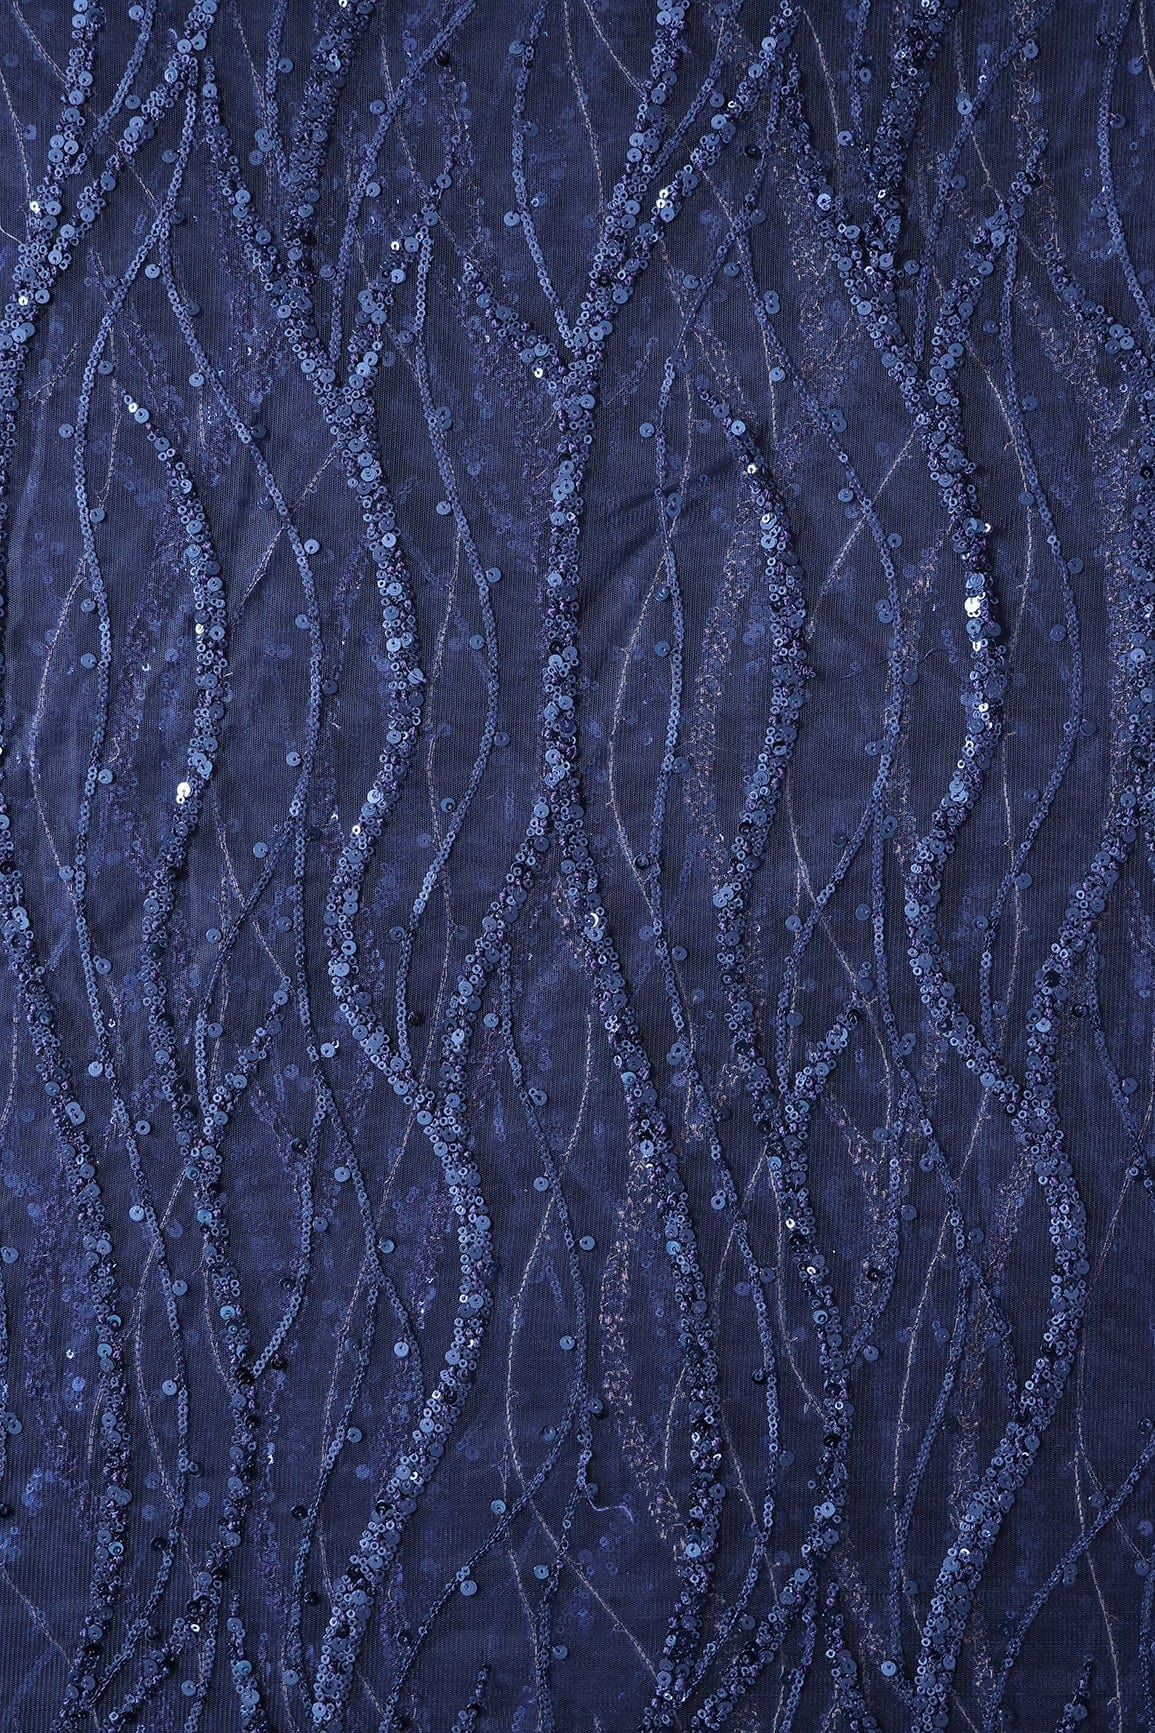 doeraa Embroidery Fabrics Beautiful Sequins With Blue Thread Wavy Embroidery Work On Navy Blue Soft Net Fabric